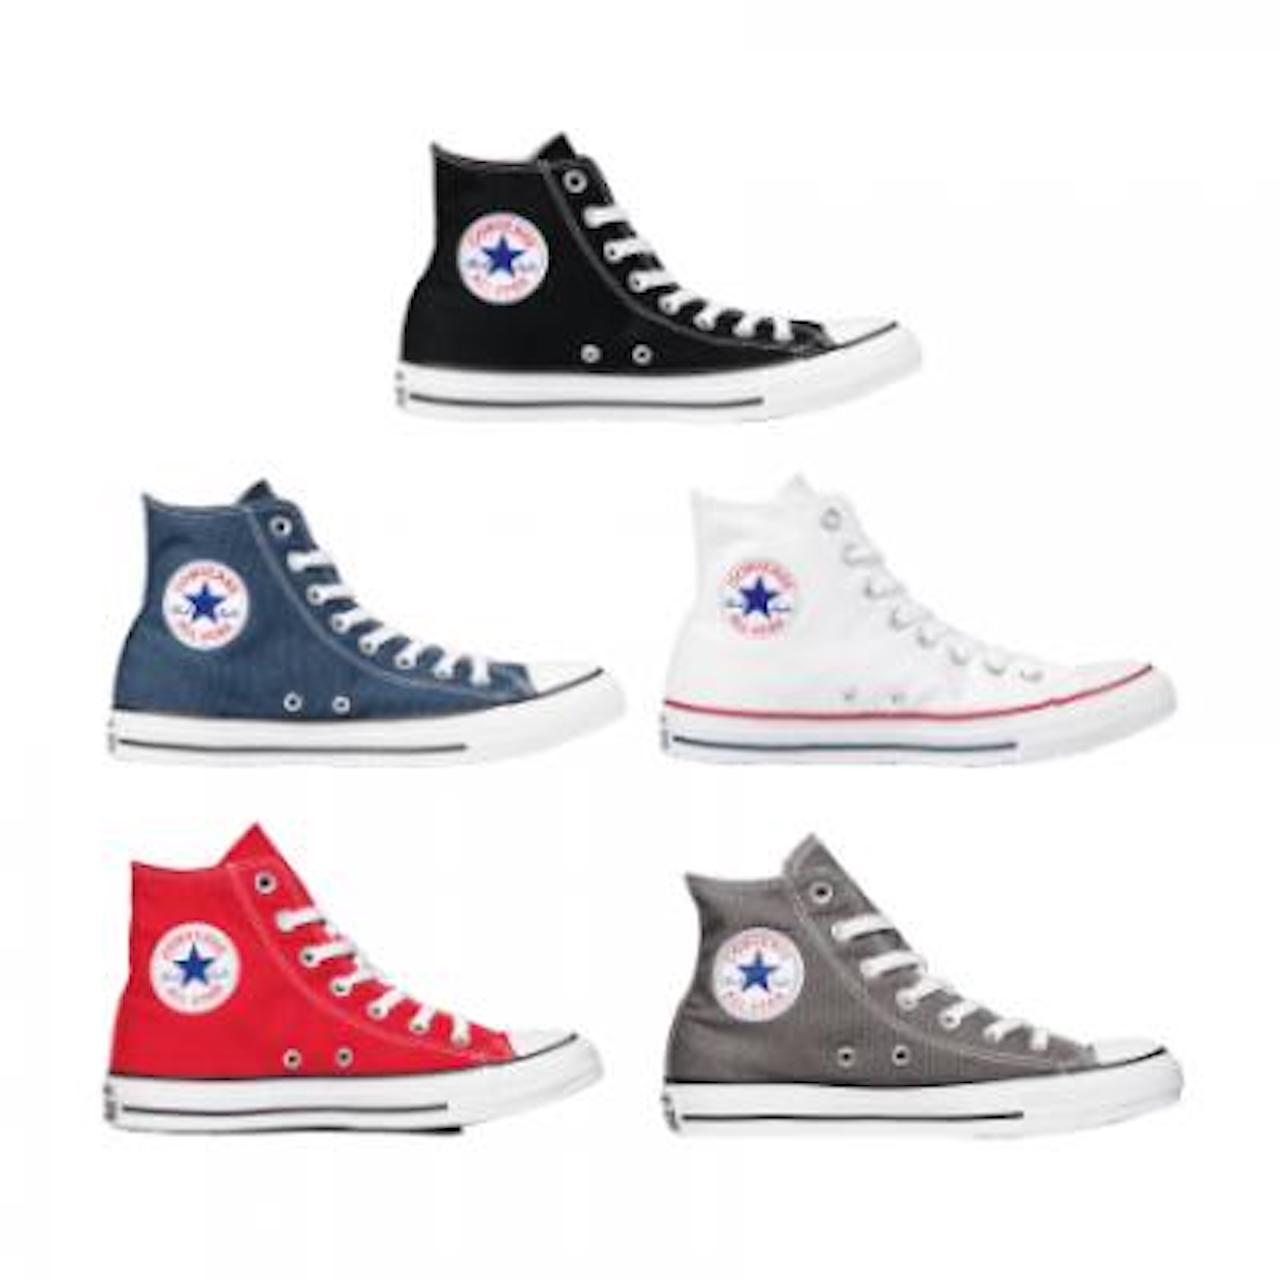 Converse Branded shoes wholesale - Fashion STOCK wholesale - stock ...